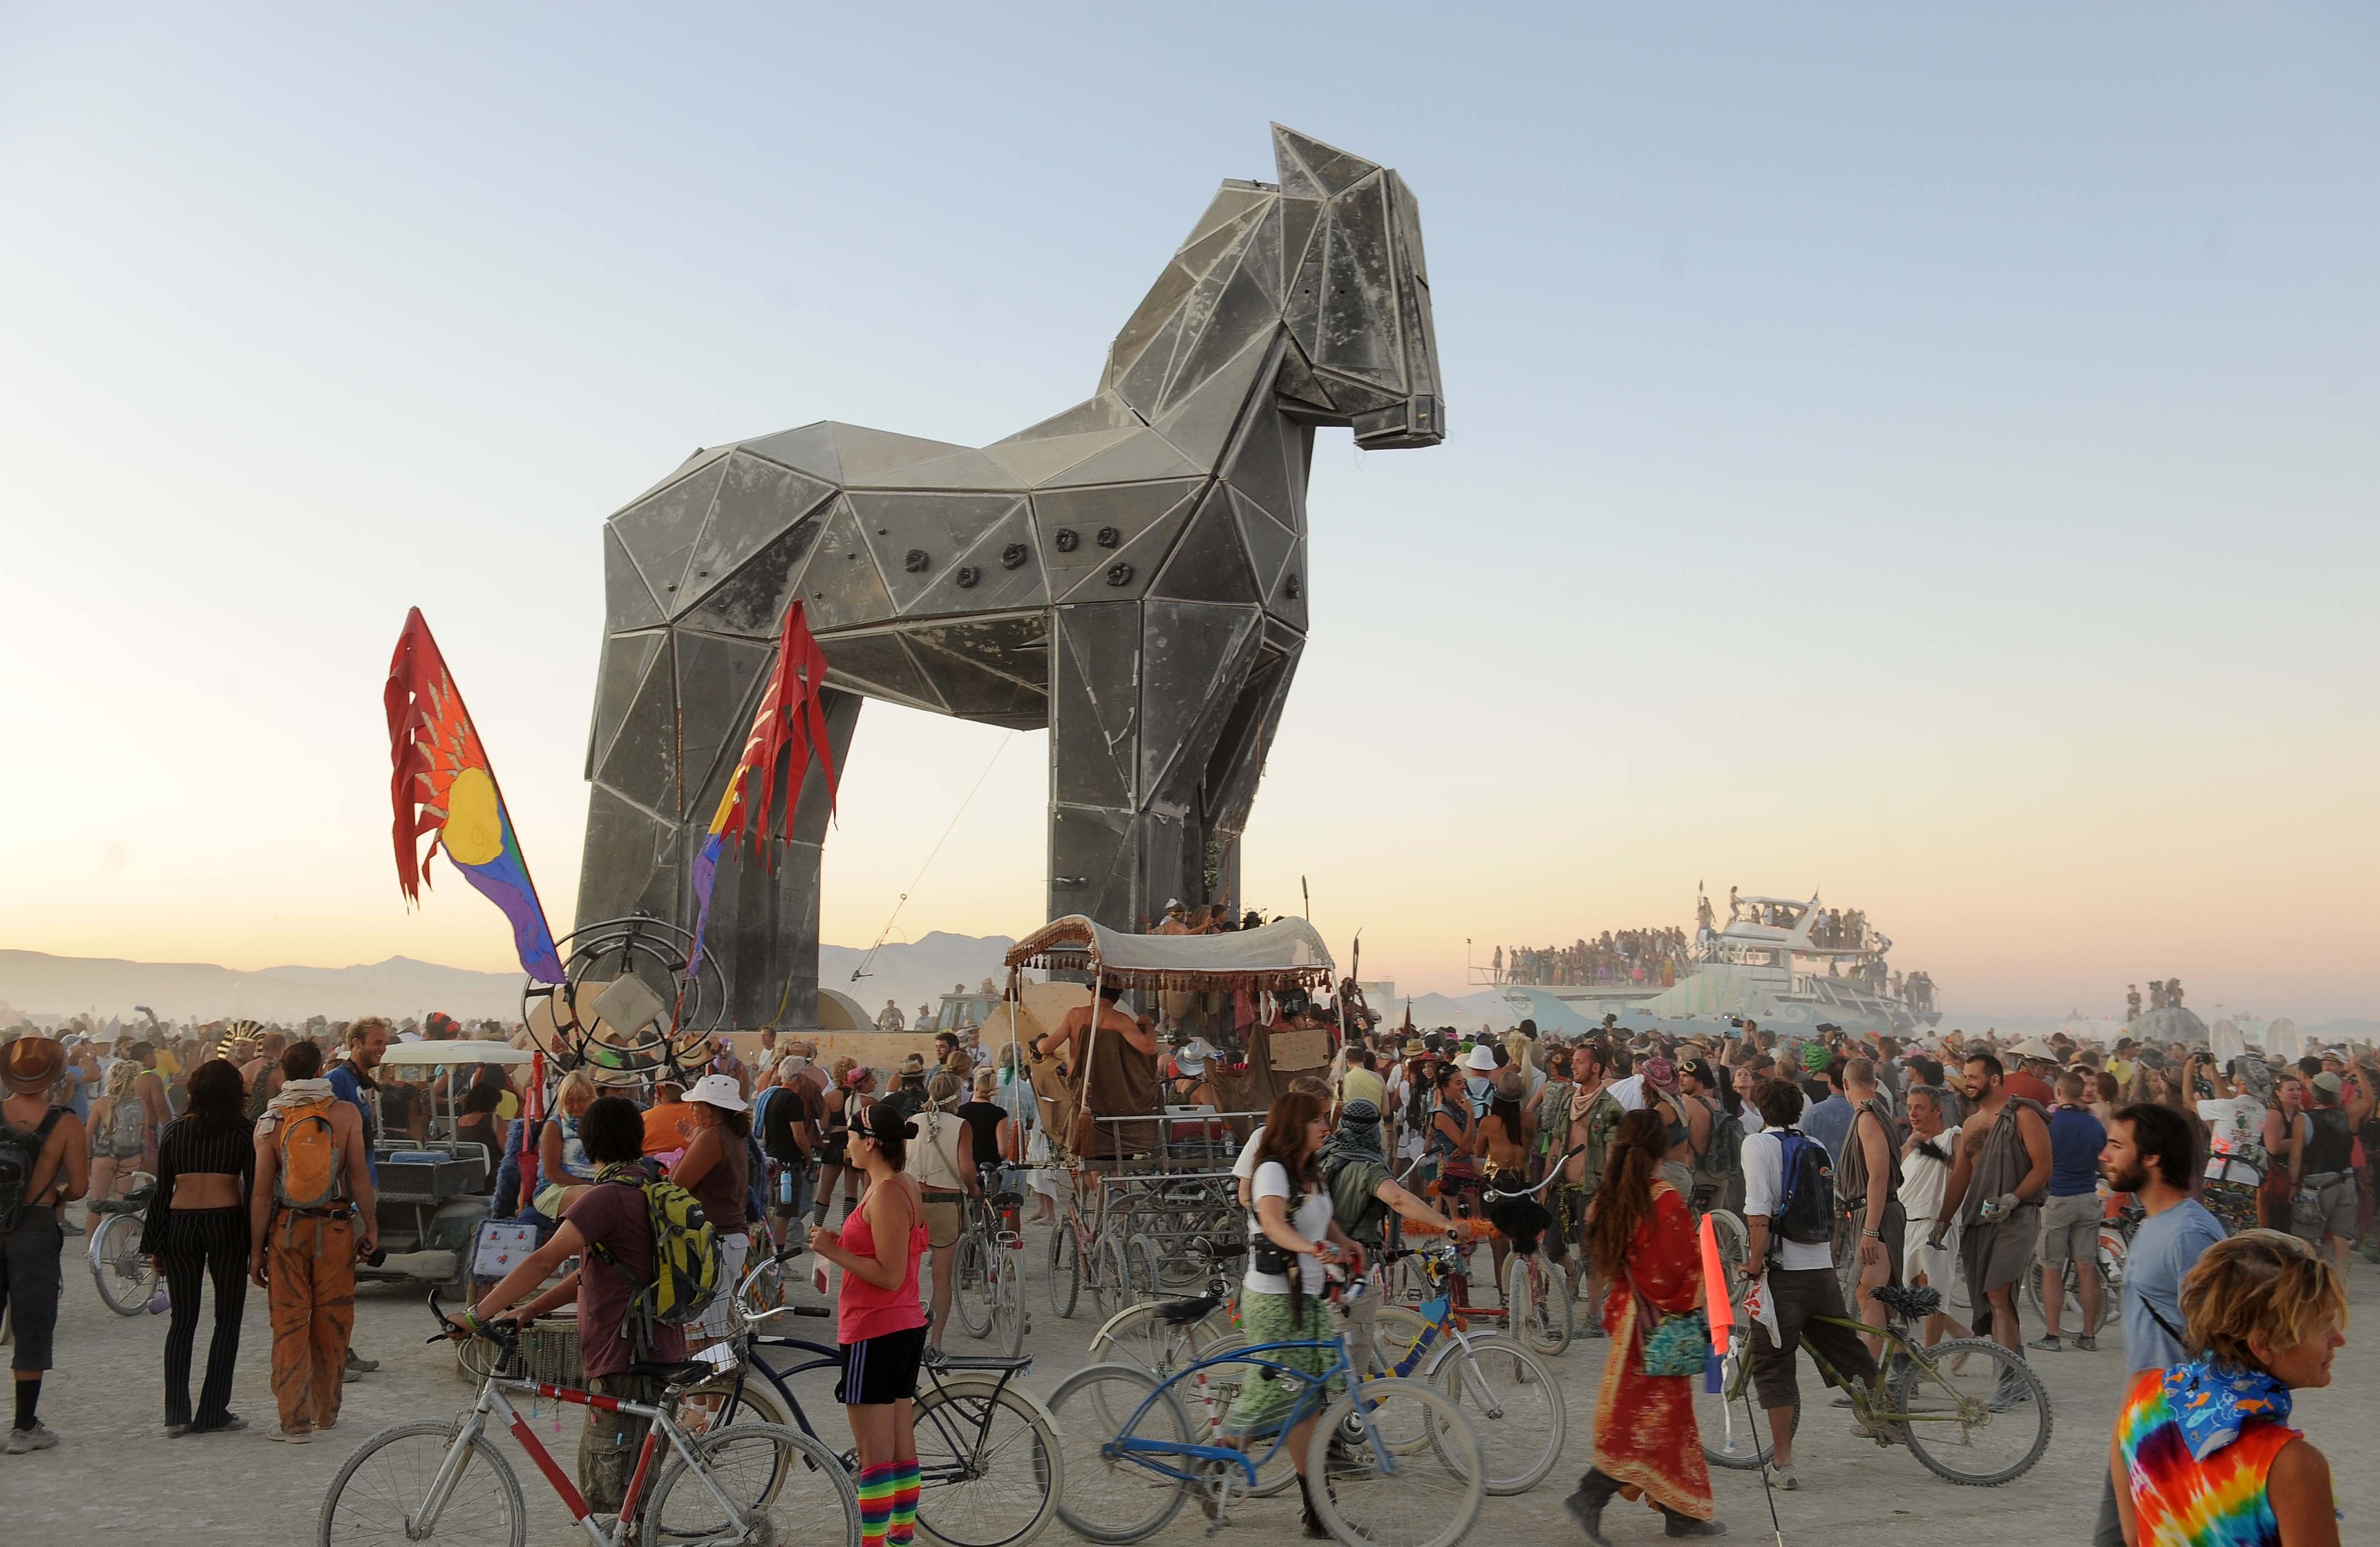 Woman dead in accident at Burning Man festival 9News